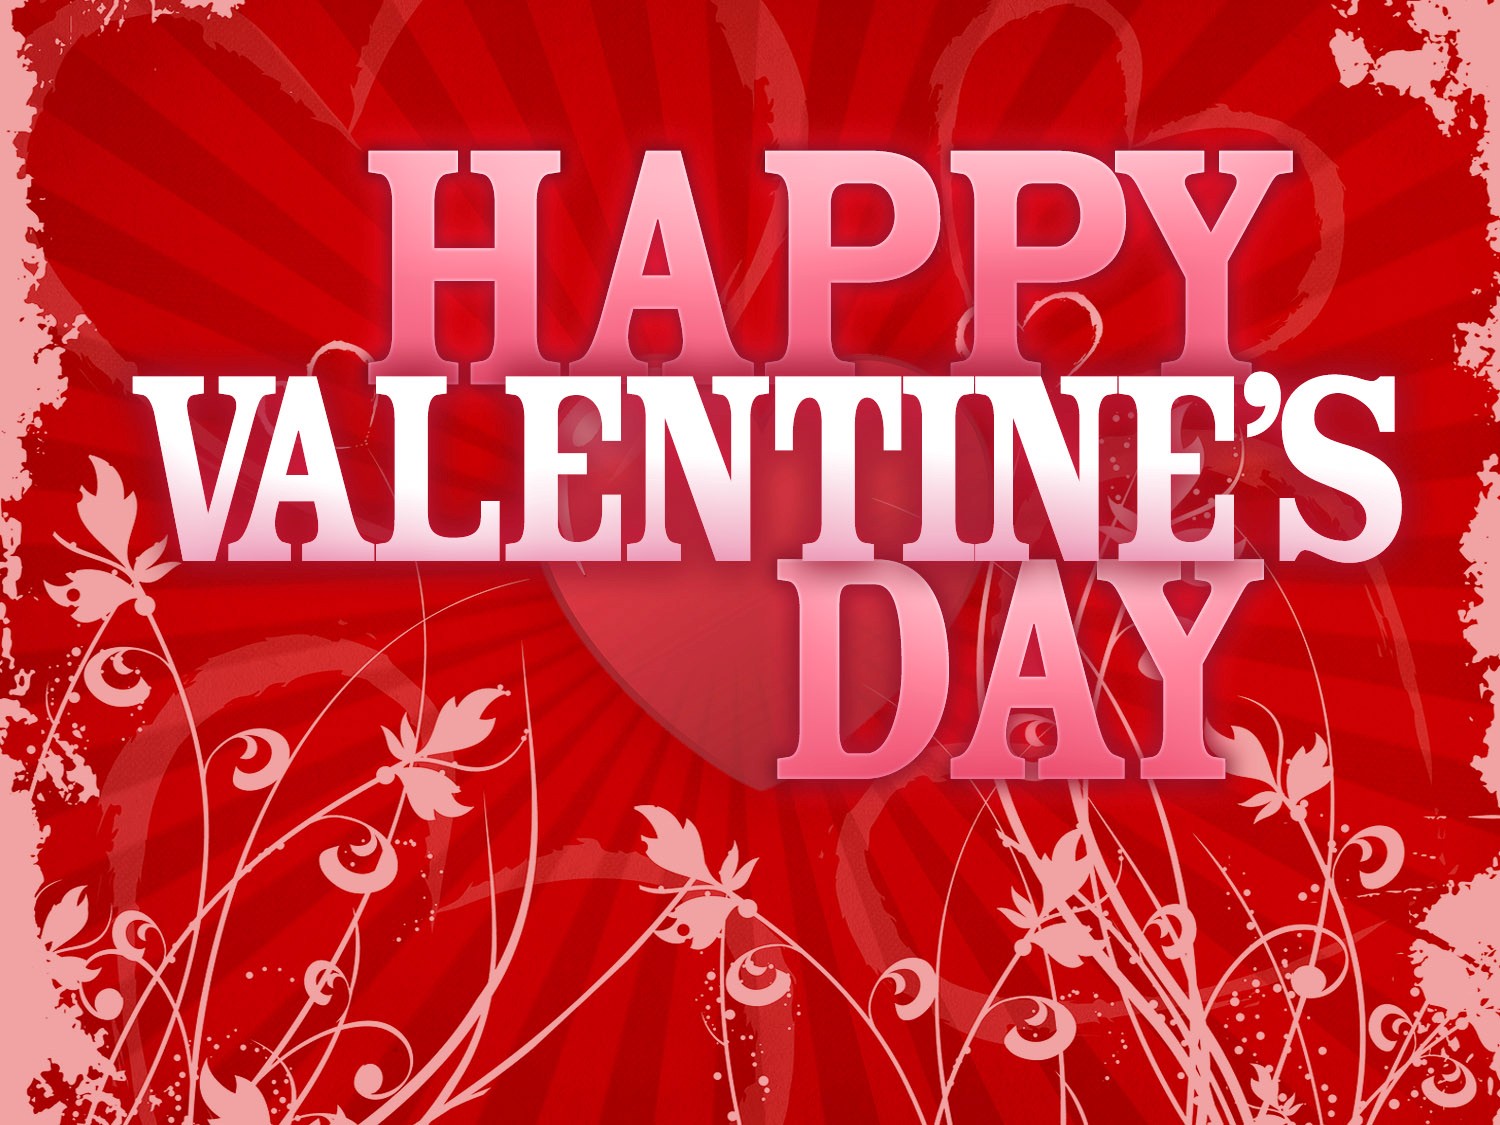 ... Polgar Global Chess Daily News and Information: Happy Valentine's Day